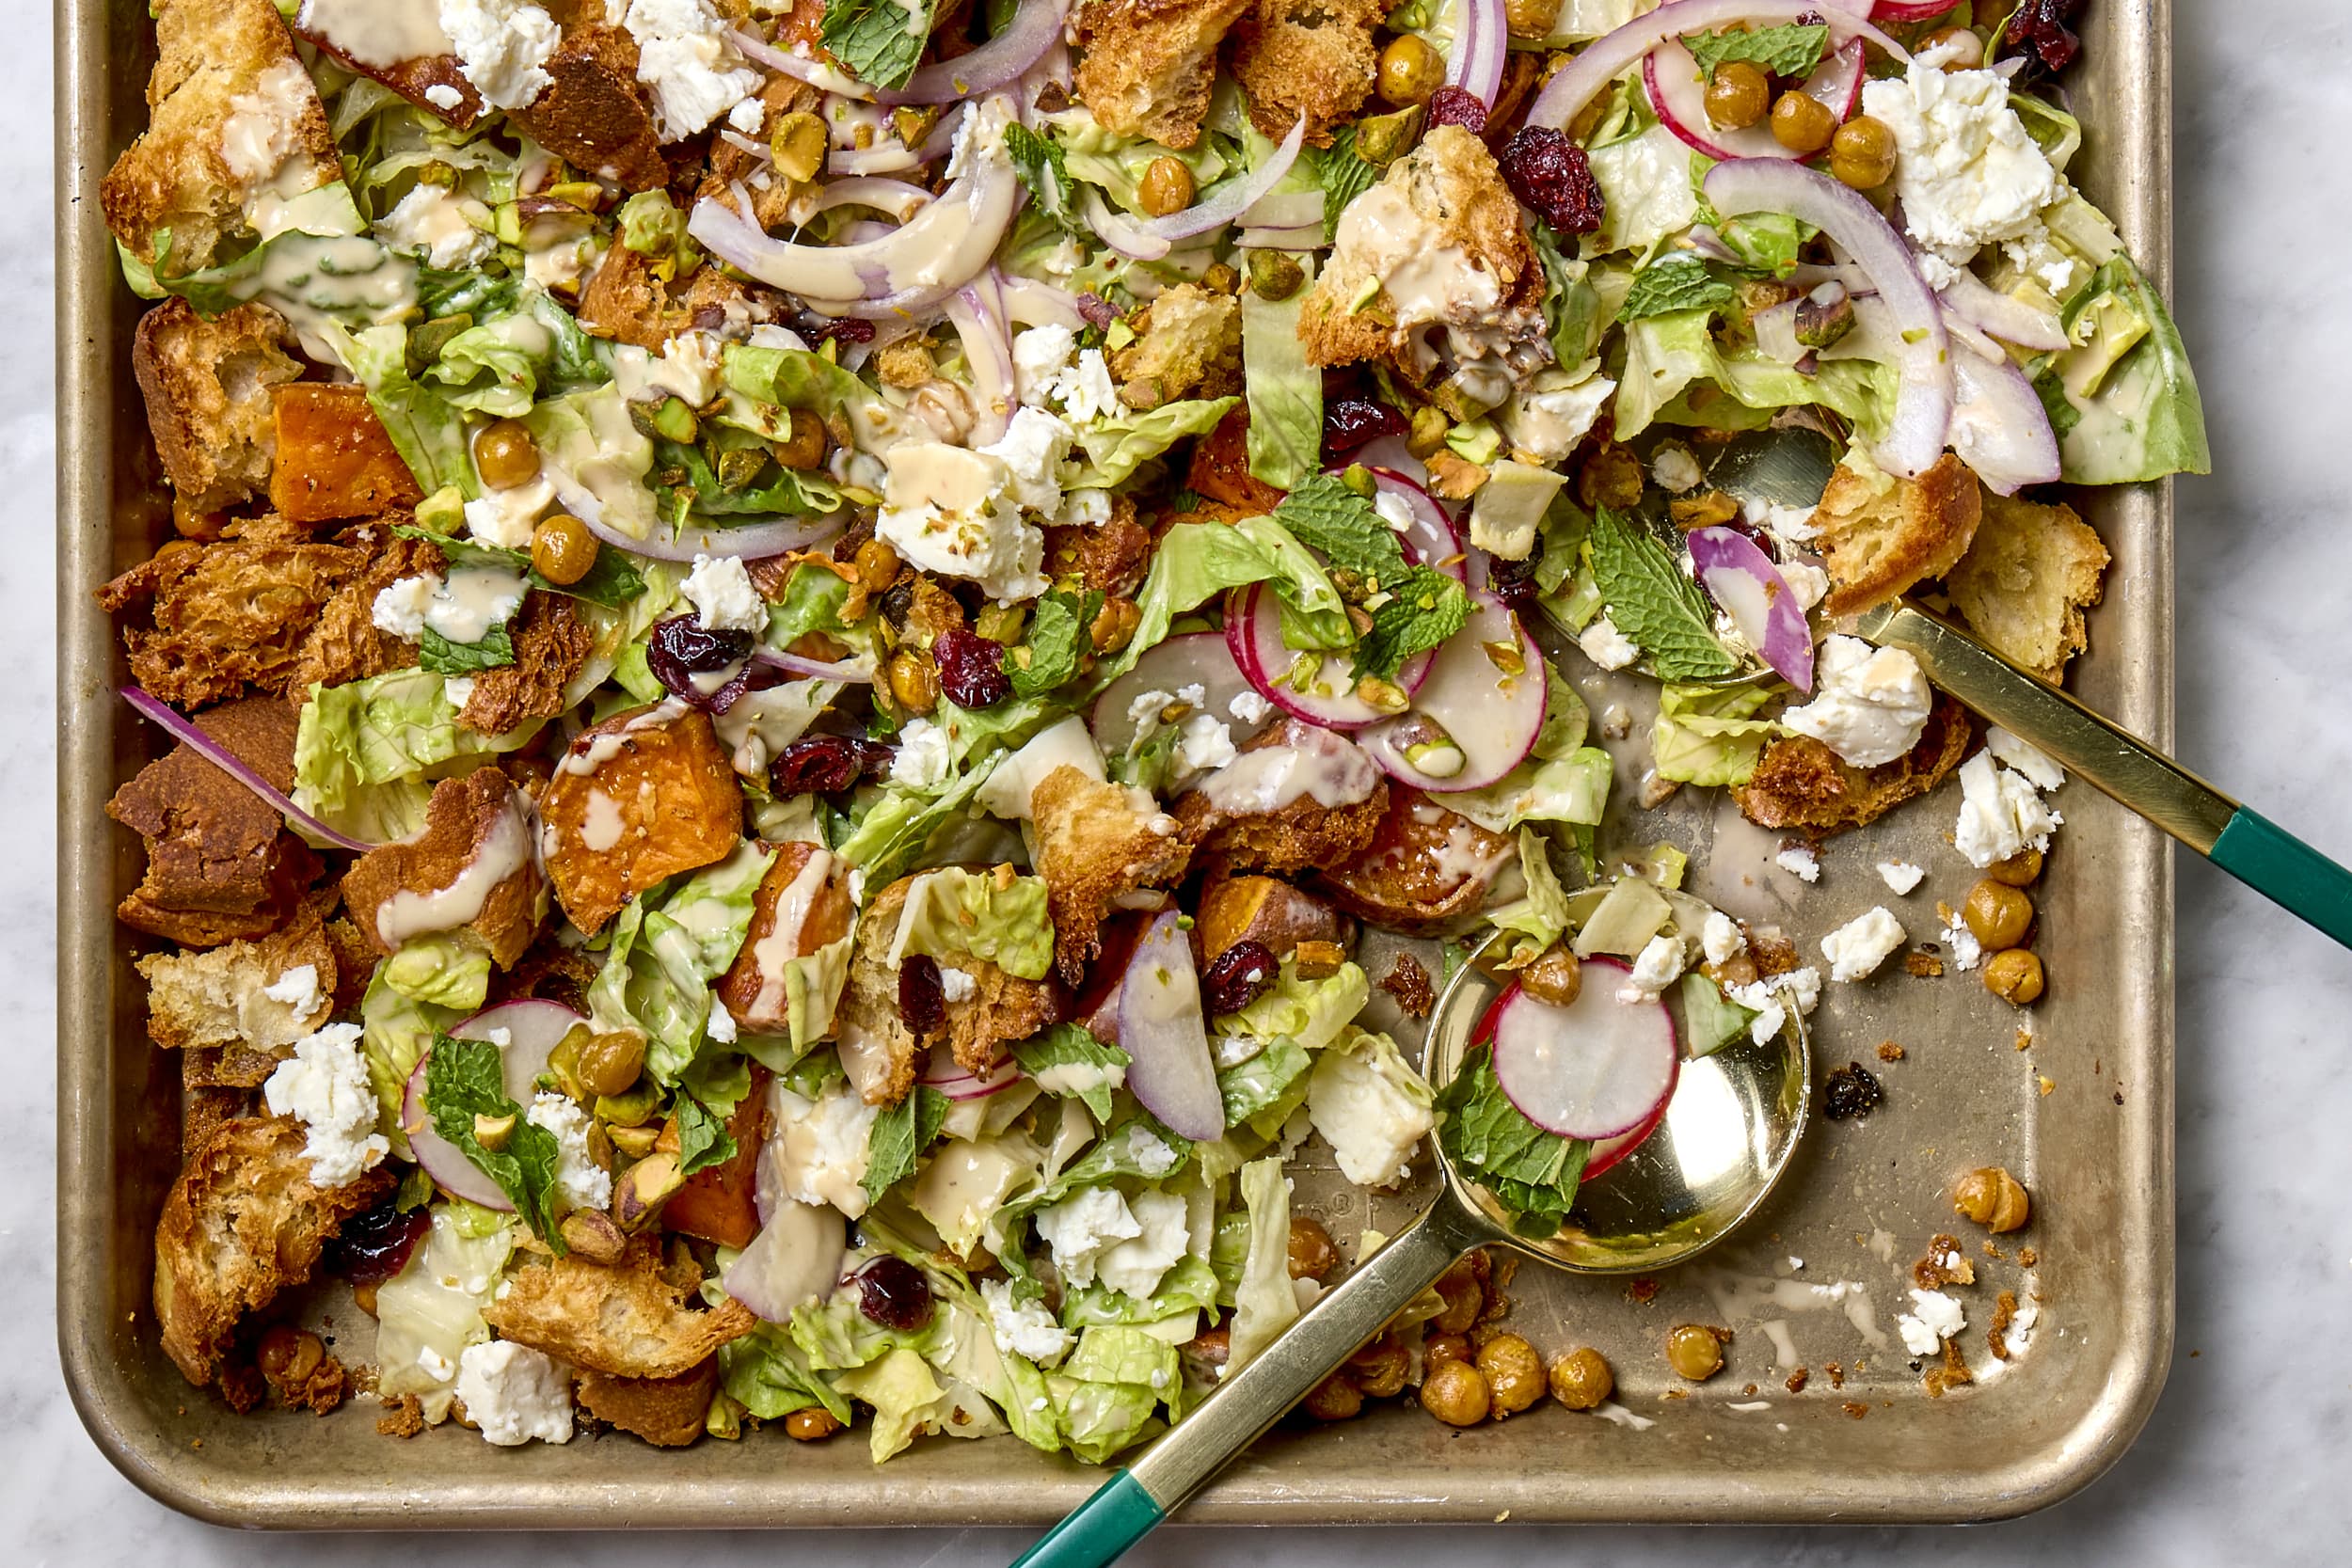 https://cdn.apartmenttherapy.info/image/upload/v1703190940/k/Photo/Recipes/2023-12-sheet-pan-salad-with-chickpeas-and-feta/sheet-pan-salad-with-chickpeas-and-feta-13.jpg